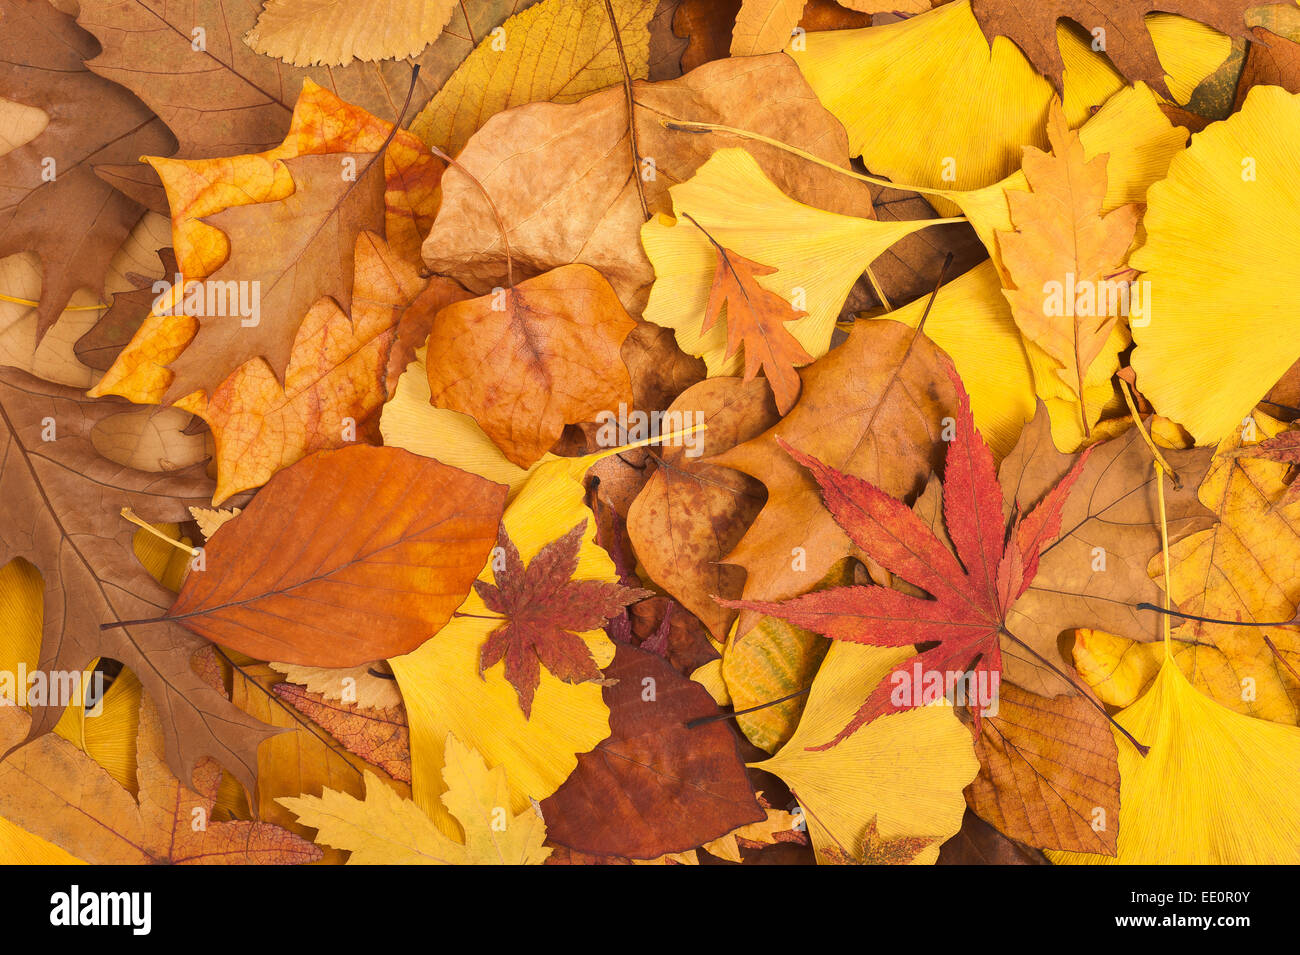 background of fallen autumn dried leaves Stock Photo